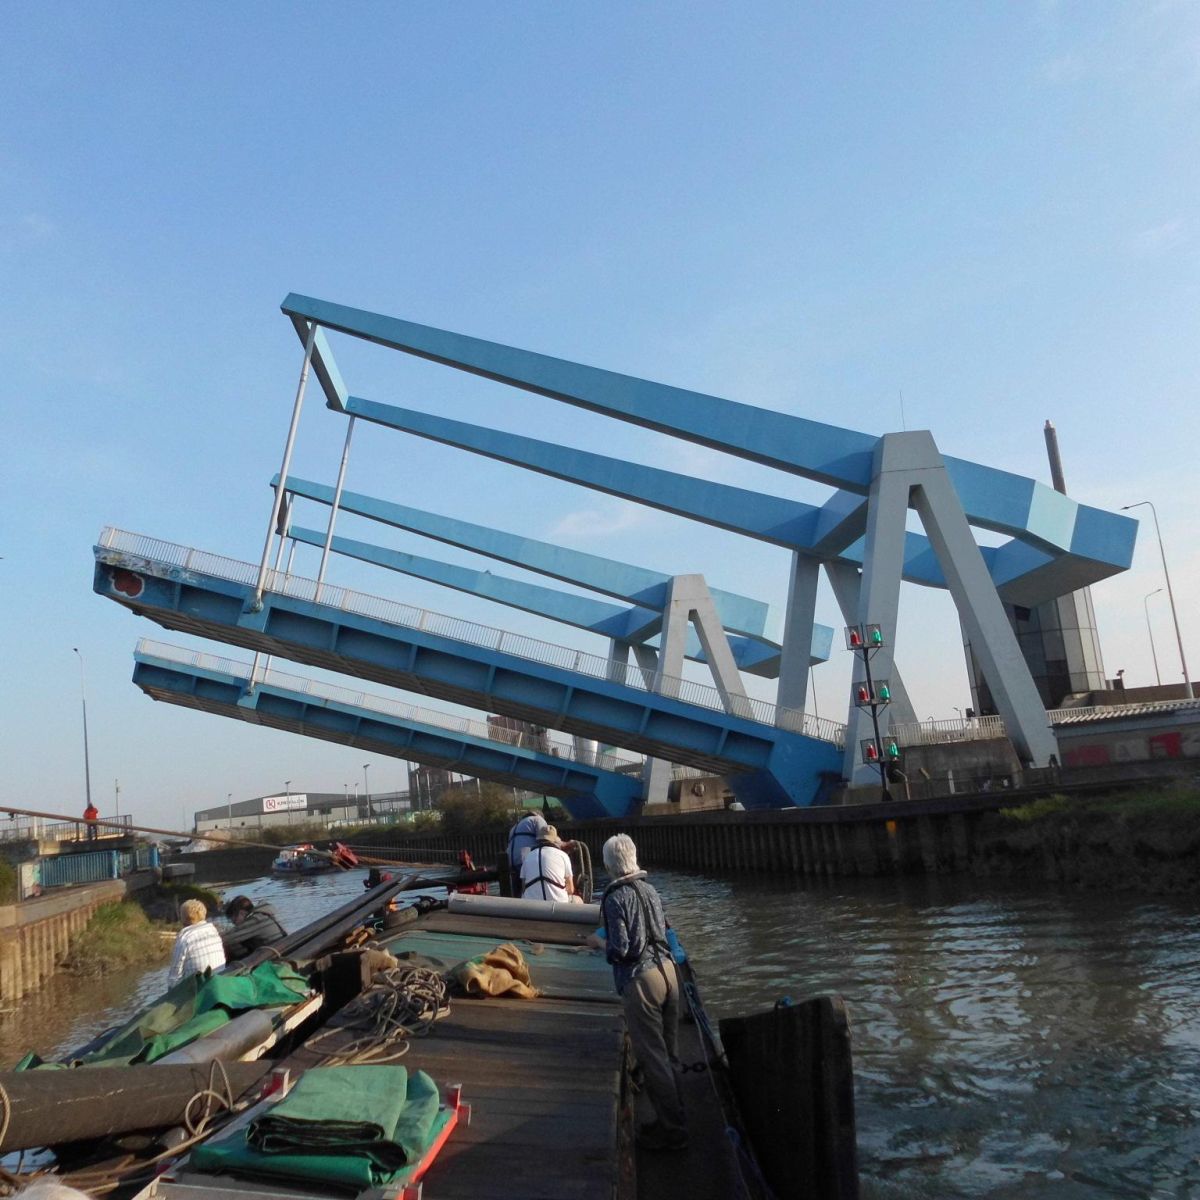 A Keel and Sloop trip along the River Hull